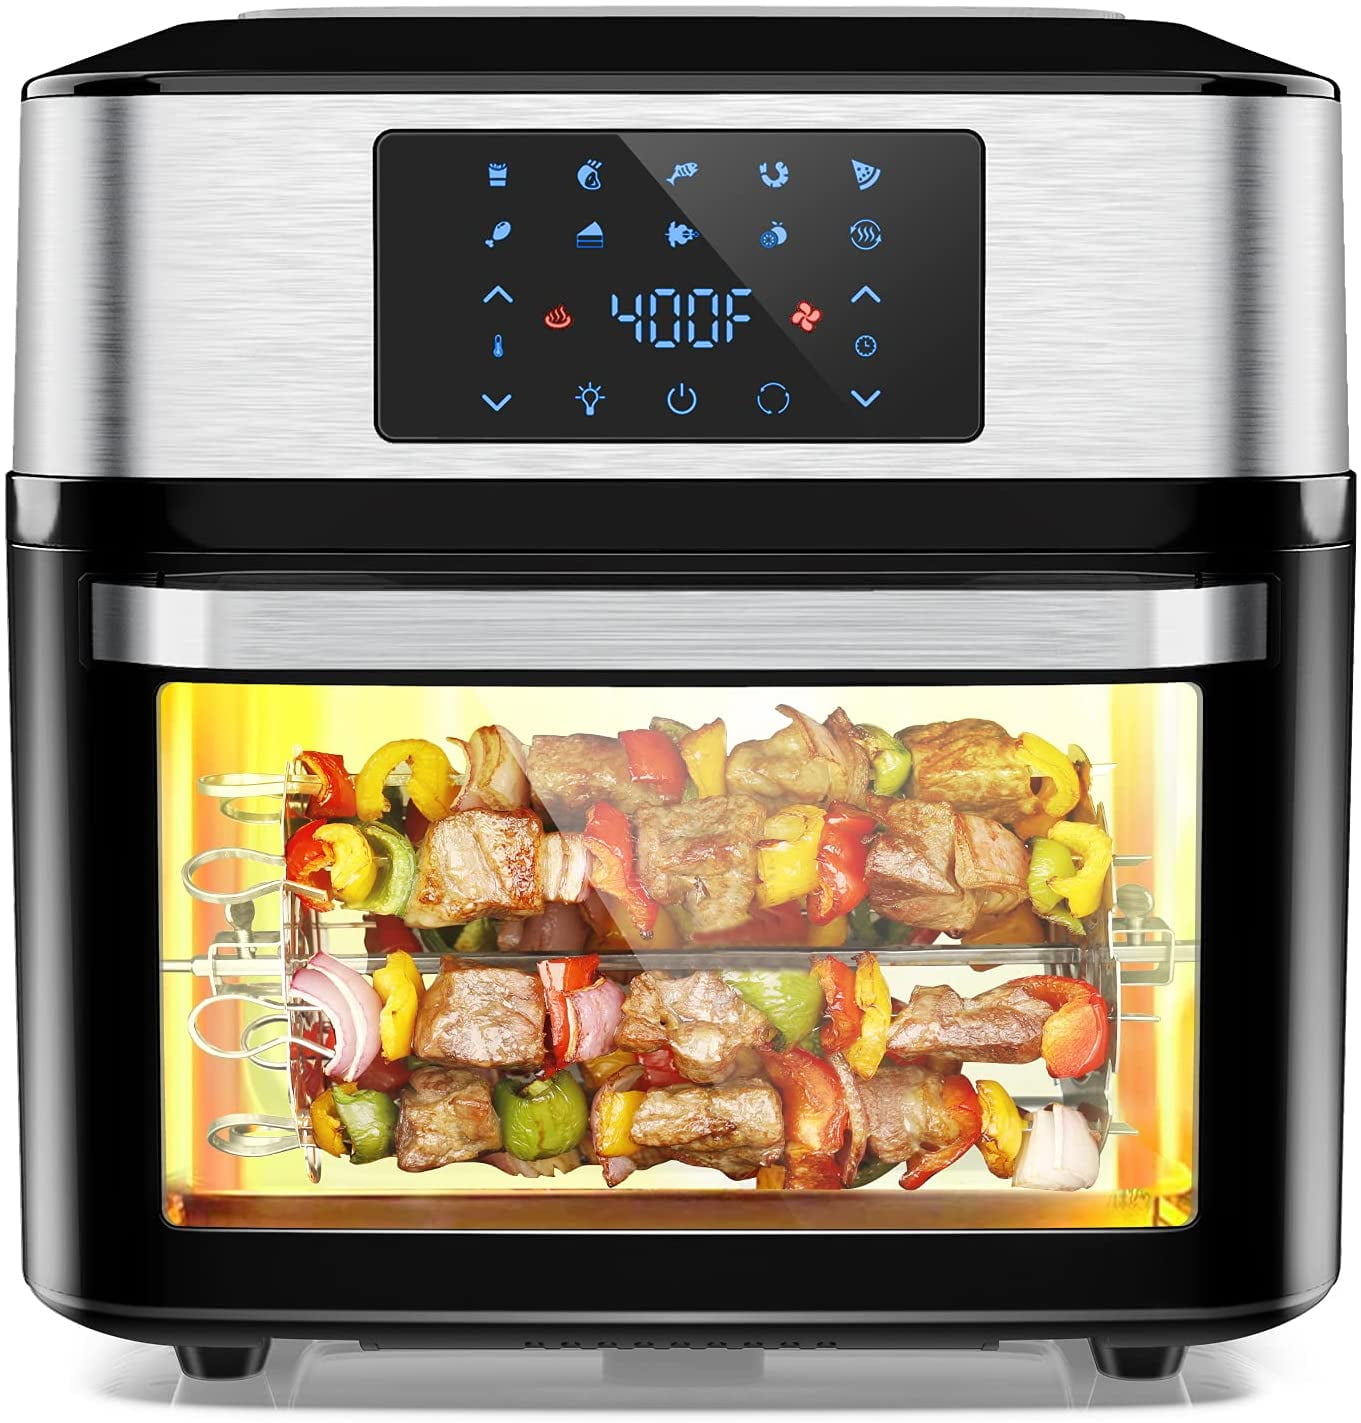 All-New 10-Quart Digital Air Fryer, I've got a treat for y'all! My  brand-new 10-Quart Digital Air Fryer is available for pre-order at  nobodylower.com/pauladeen just in time for holiday